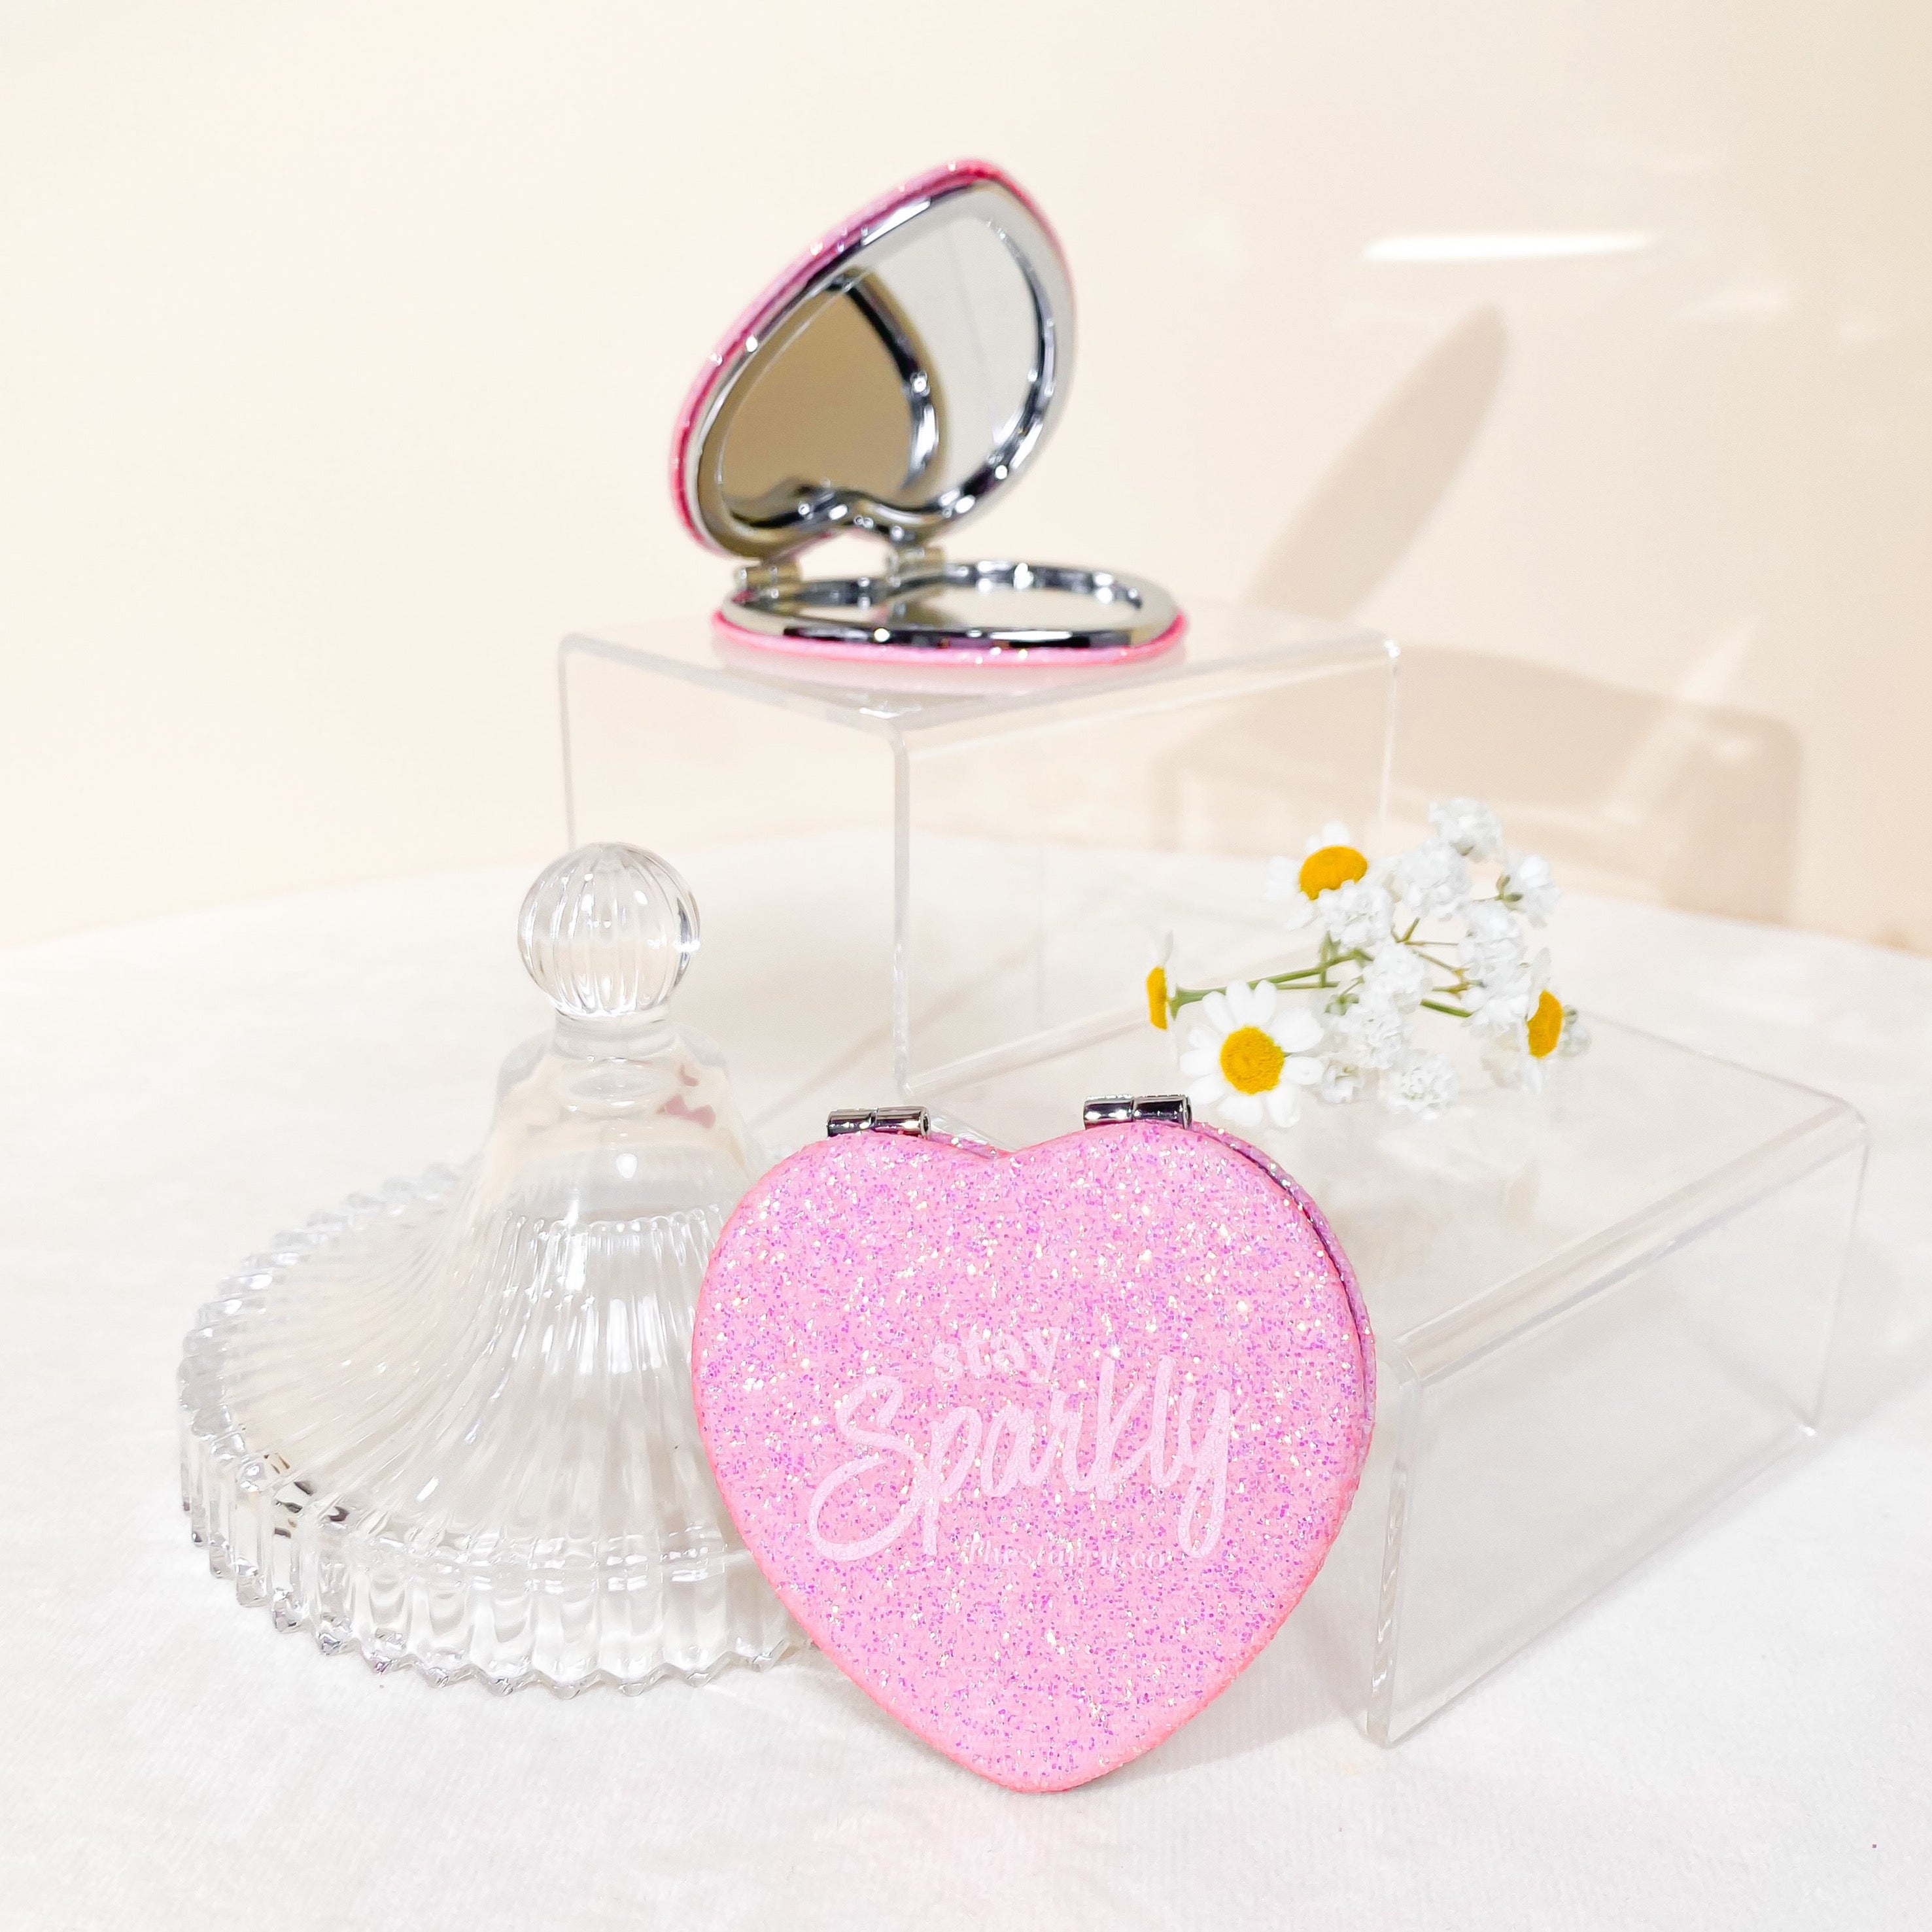 &quot;STAY SPARKLY&quot; POCKET MIRROR